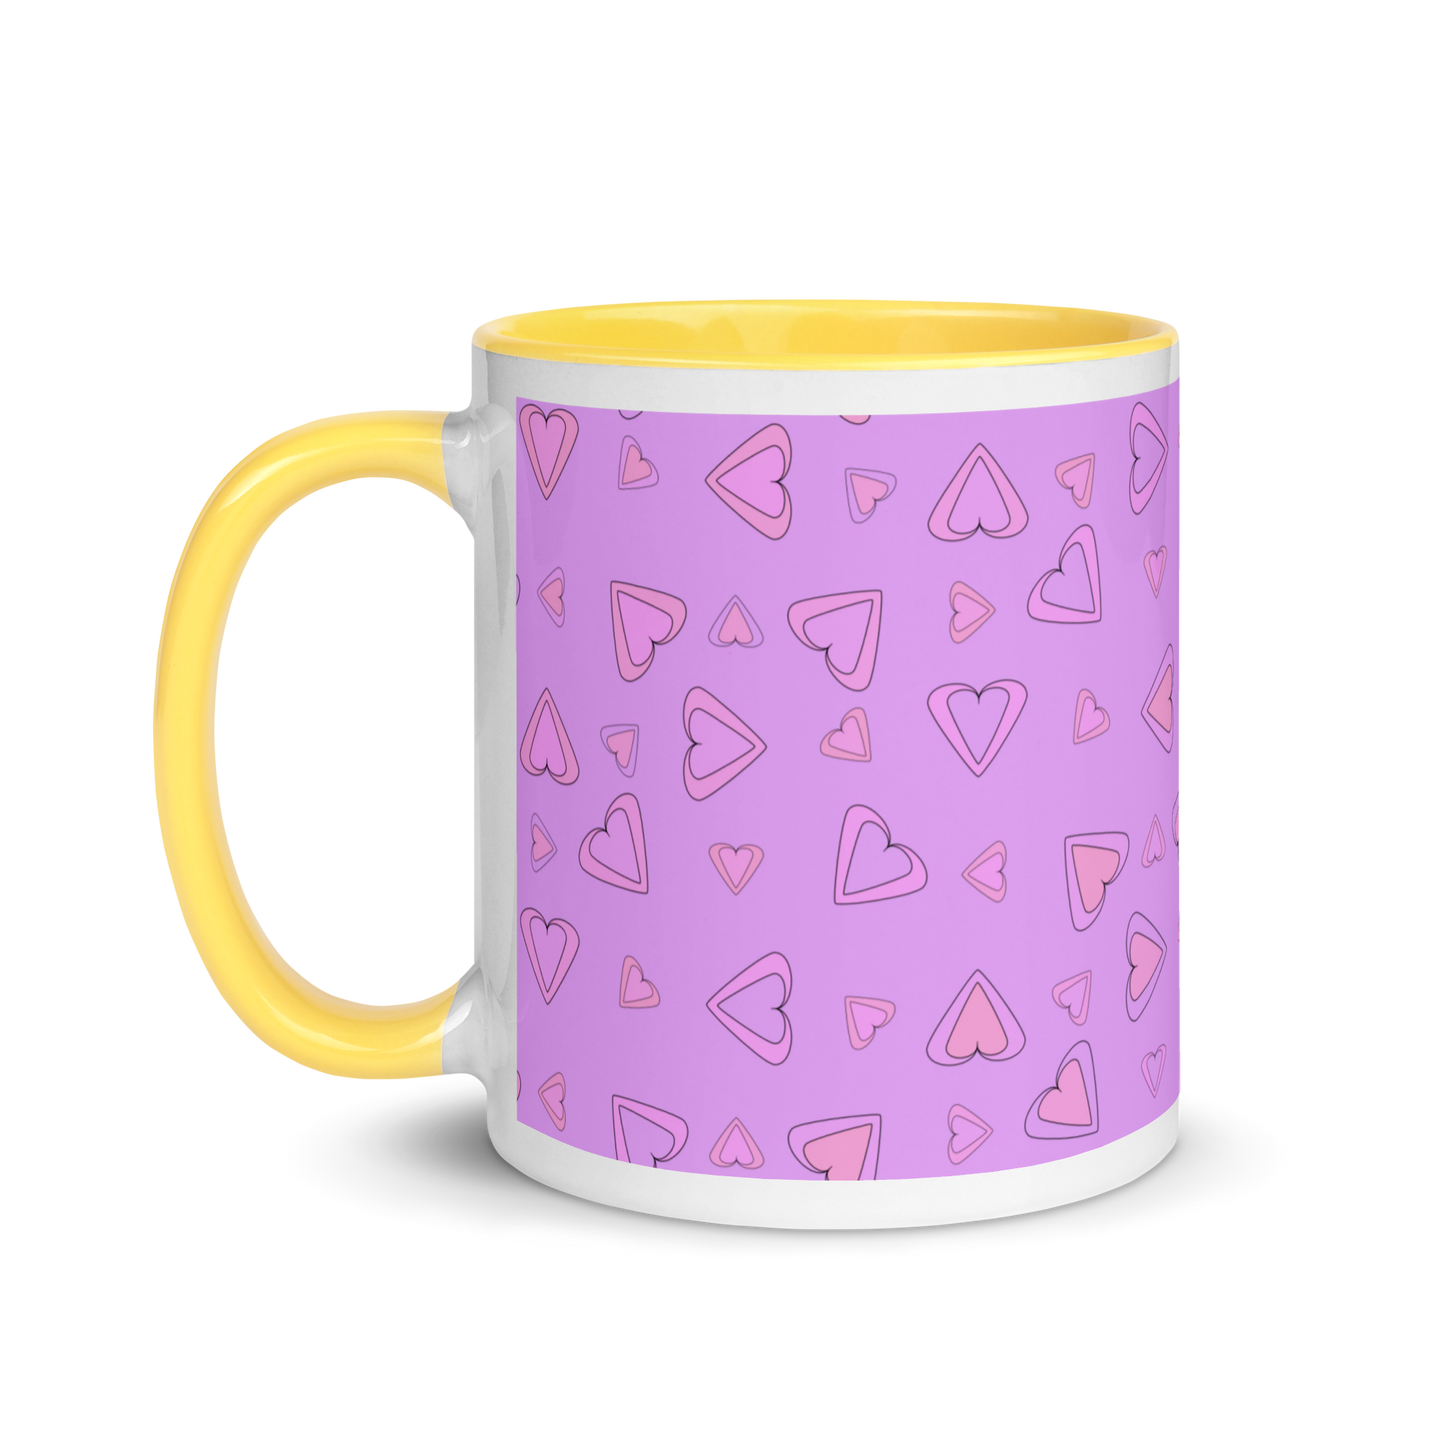 Rainbow Of Hearts | Batch 01 | Seamless Patterns | White Ceramic Mug with Color Inside - #8